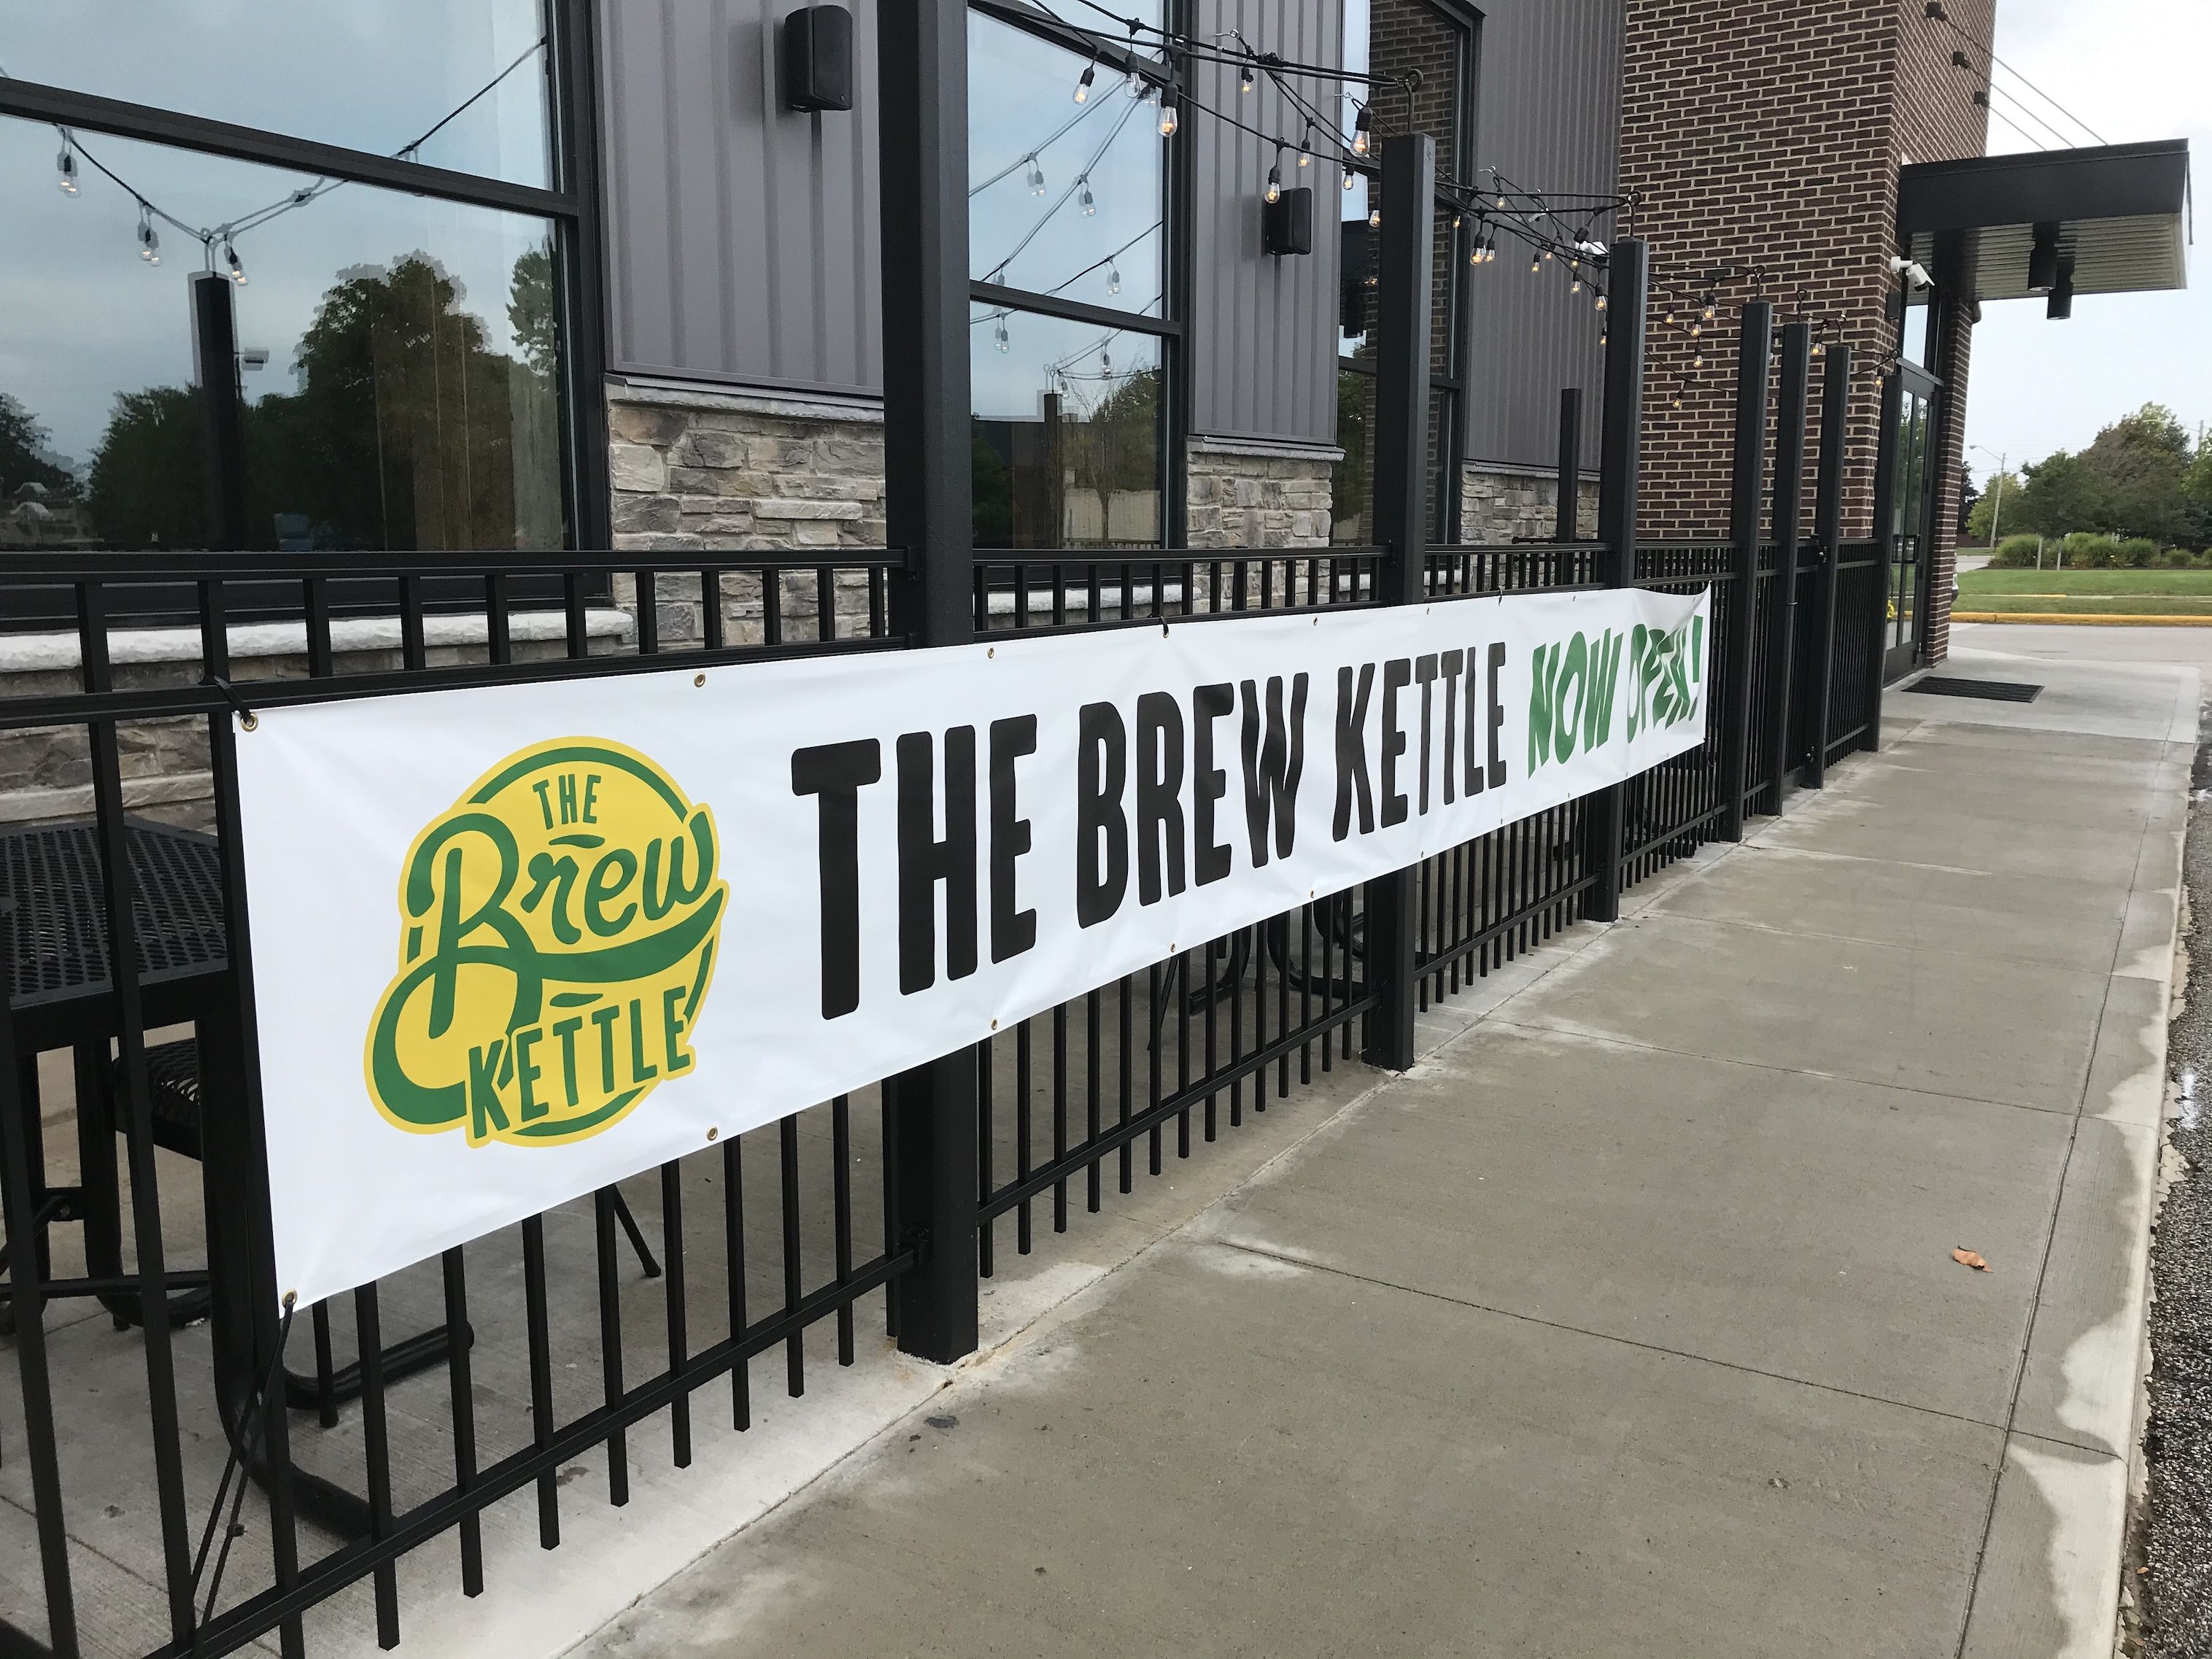 The Brew Kettle Mentor - The Brew Kettle